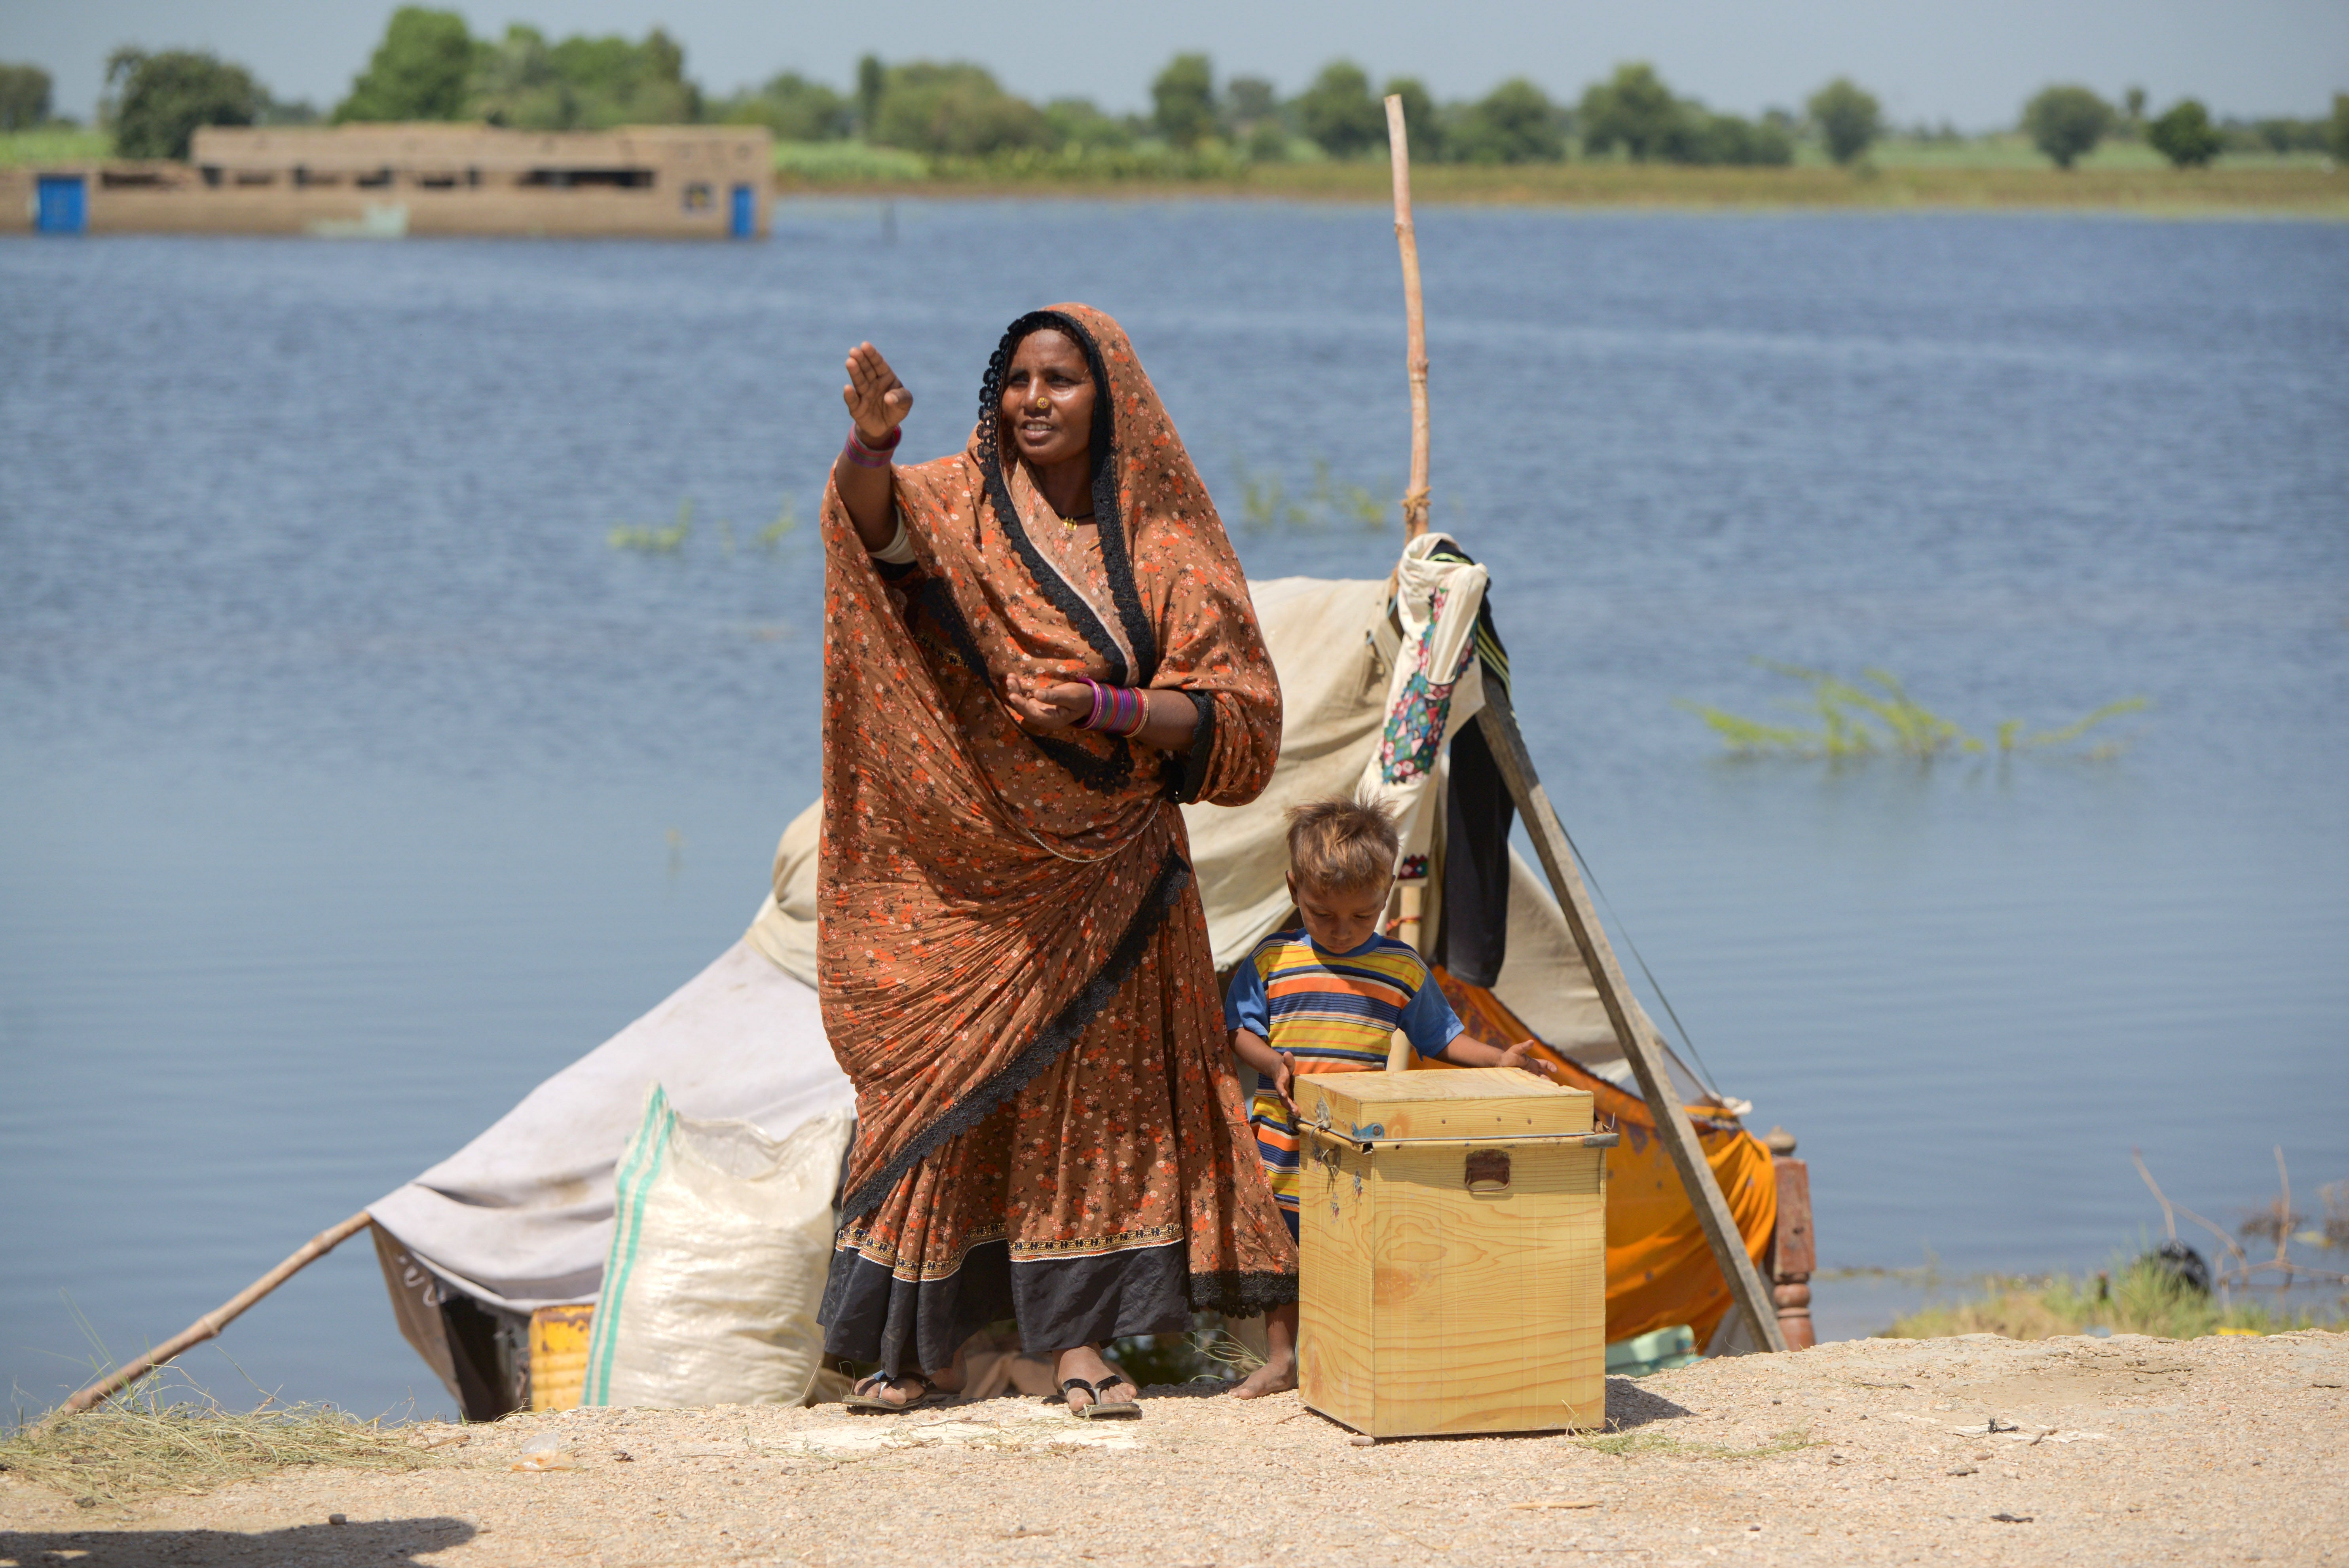 Soni, 37, stands with her family in front of her temporary shelter in Sindh